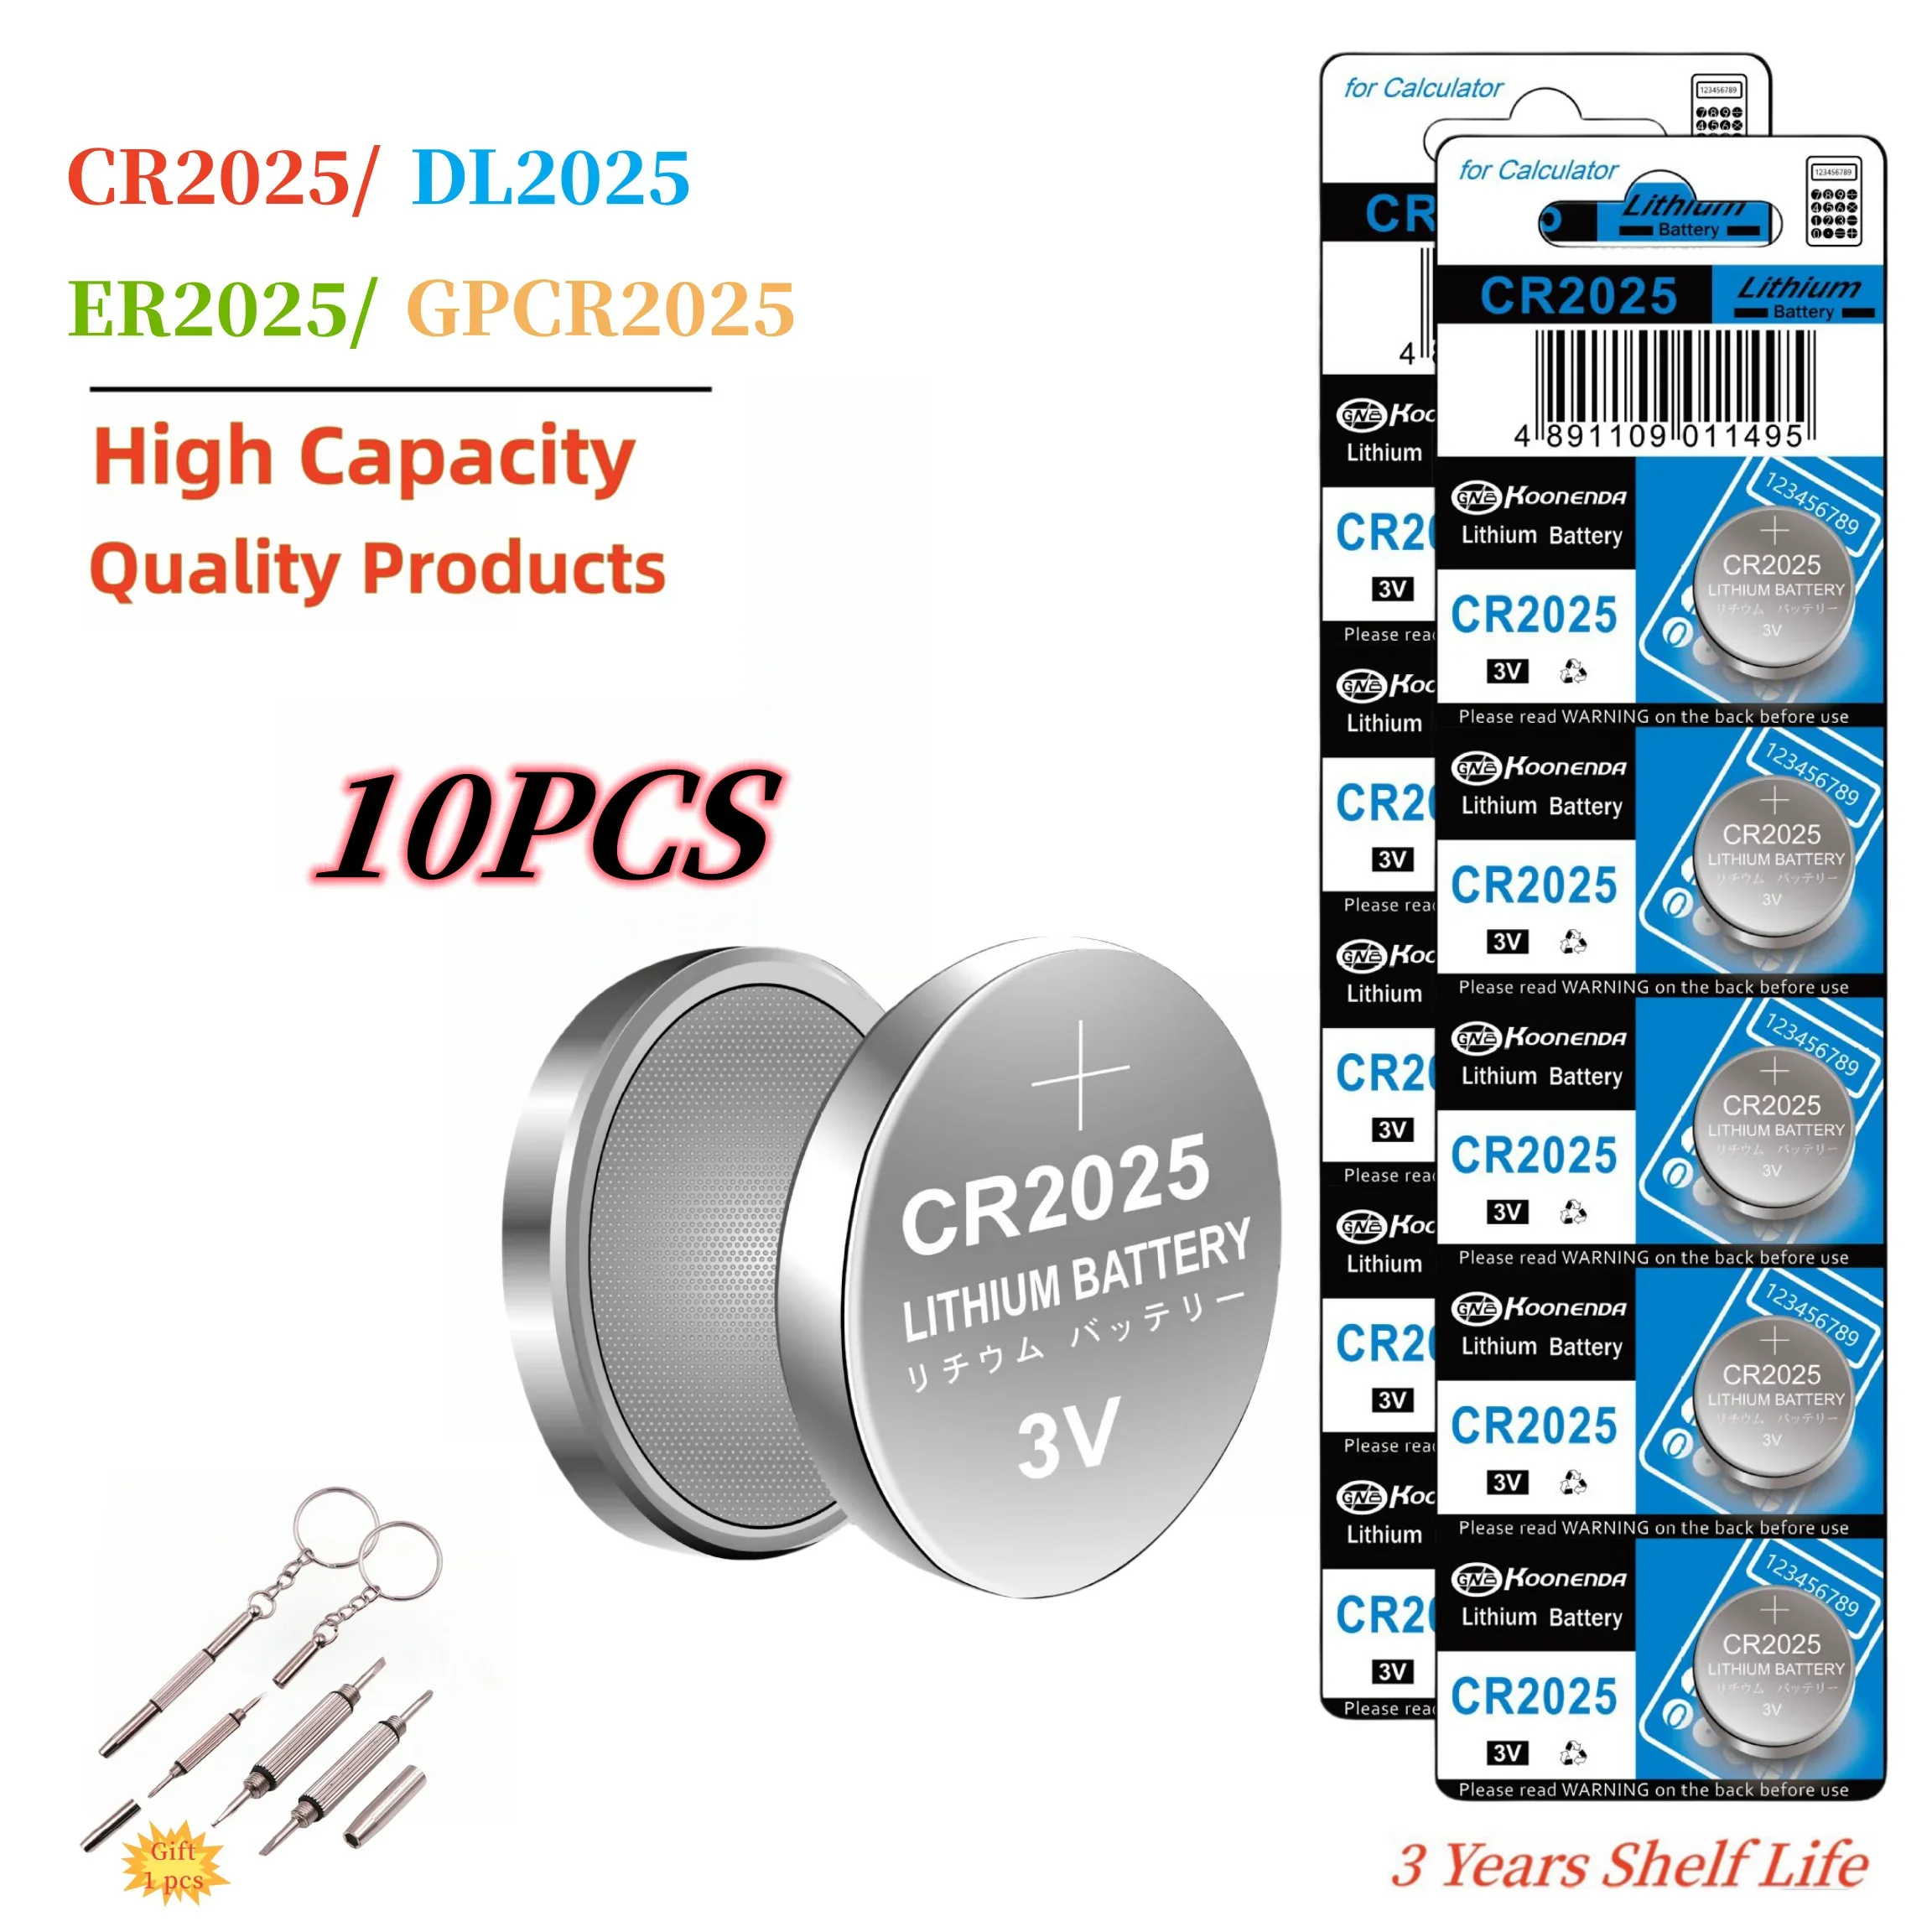 

10PCS CR2025 3V Lithium Coin Cell Battery DL2025 ECR2025 CR 2025 Botton batteries for Key Fob Car Remote Glucose Monitor